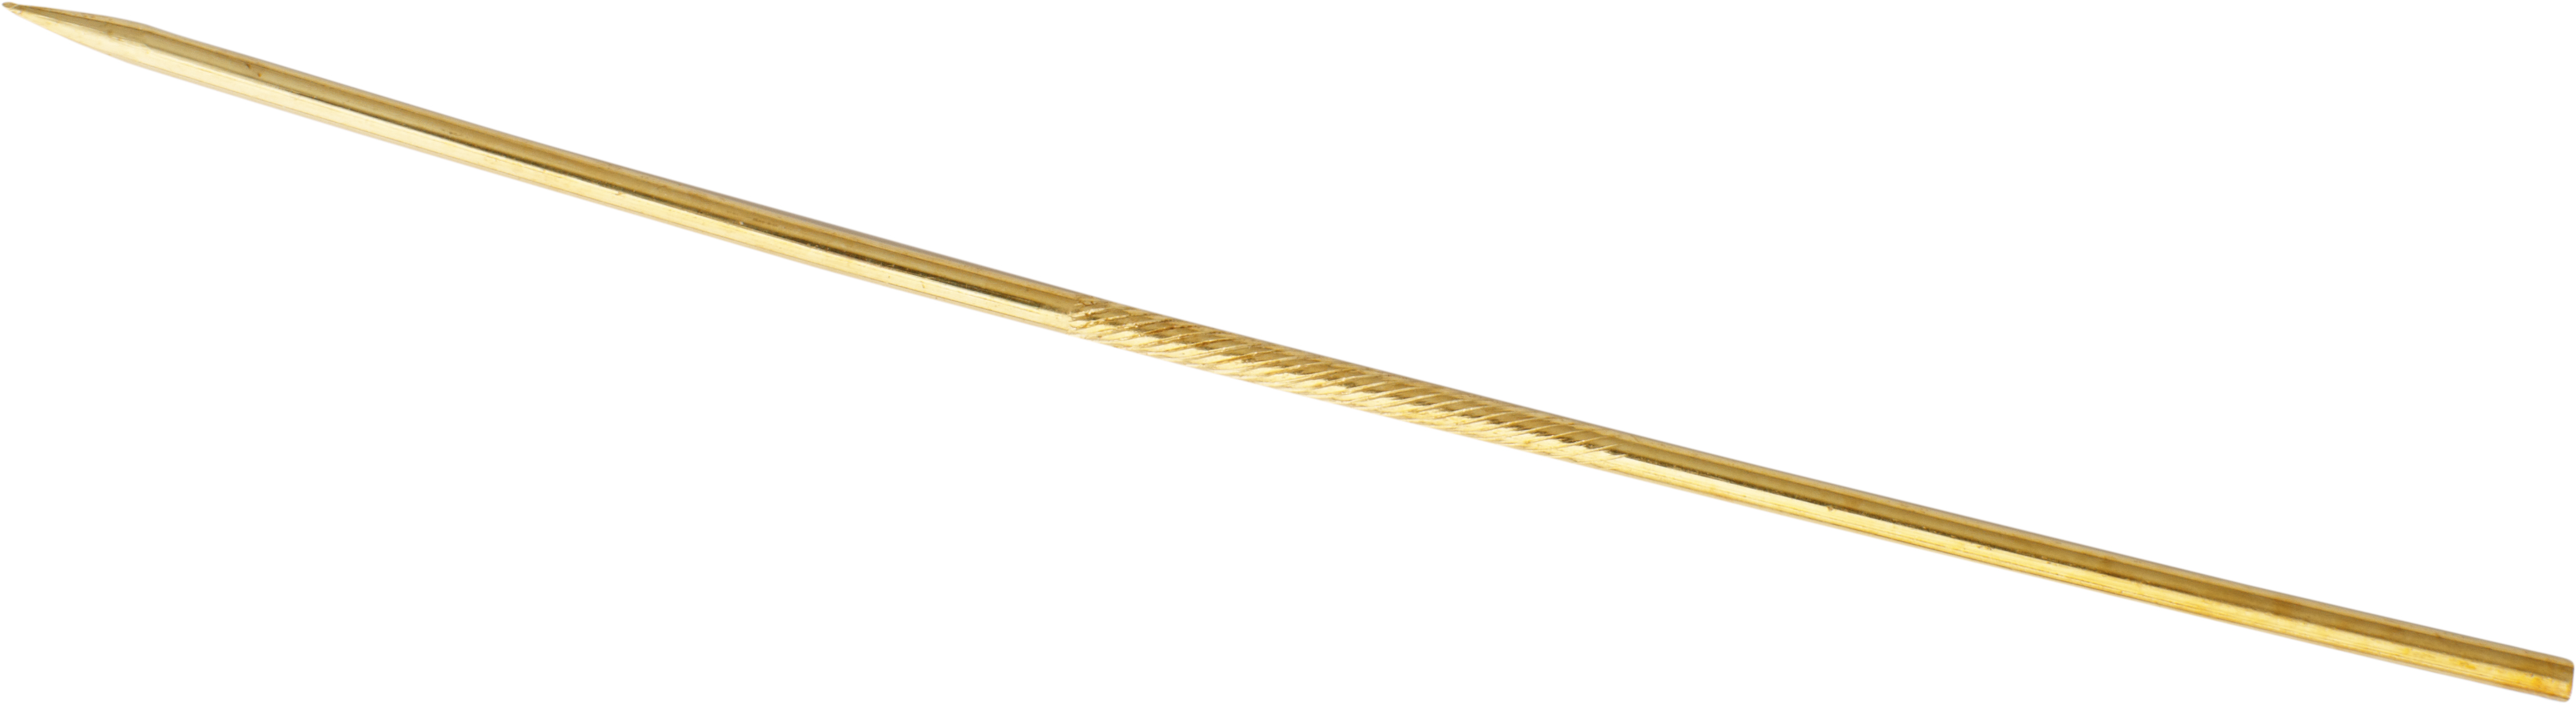 Tie tack gold 585/- Gg length 60,00mm , straight